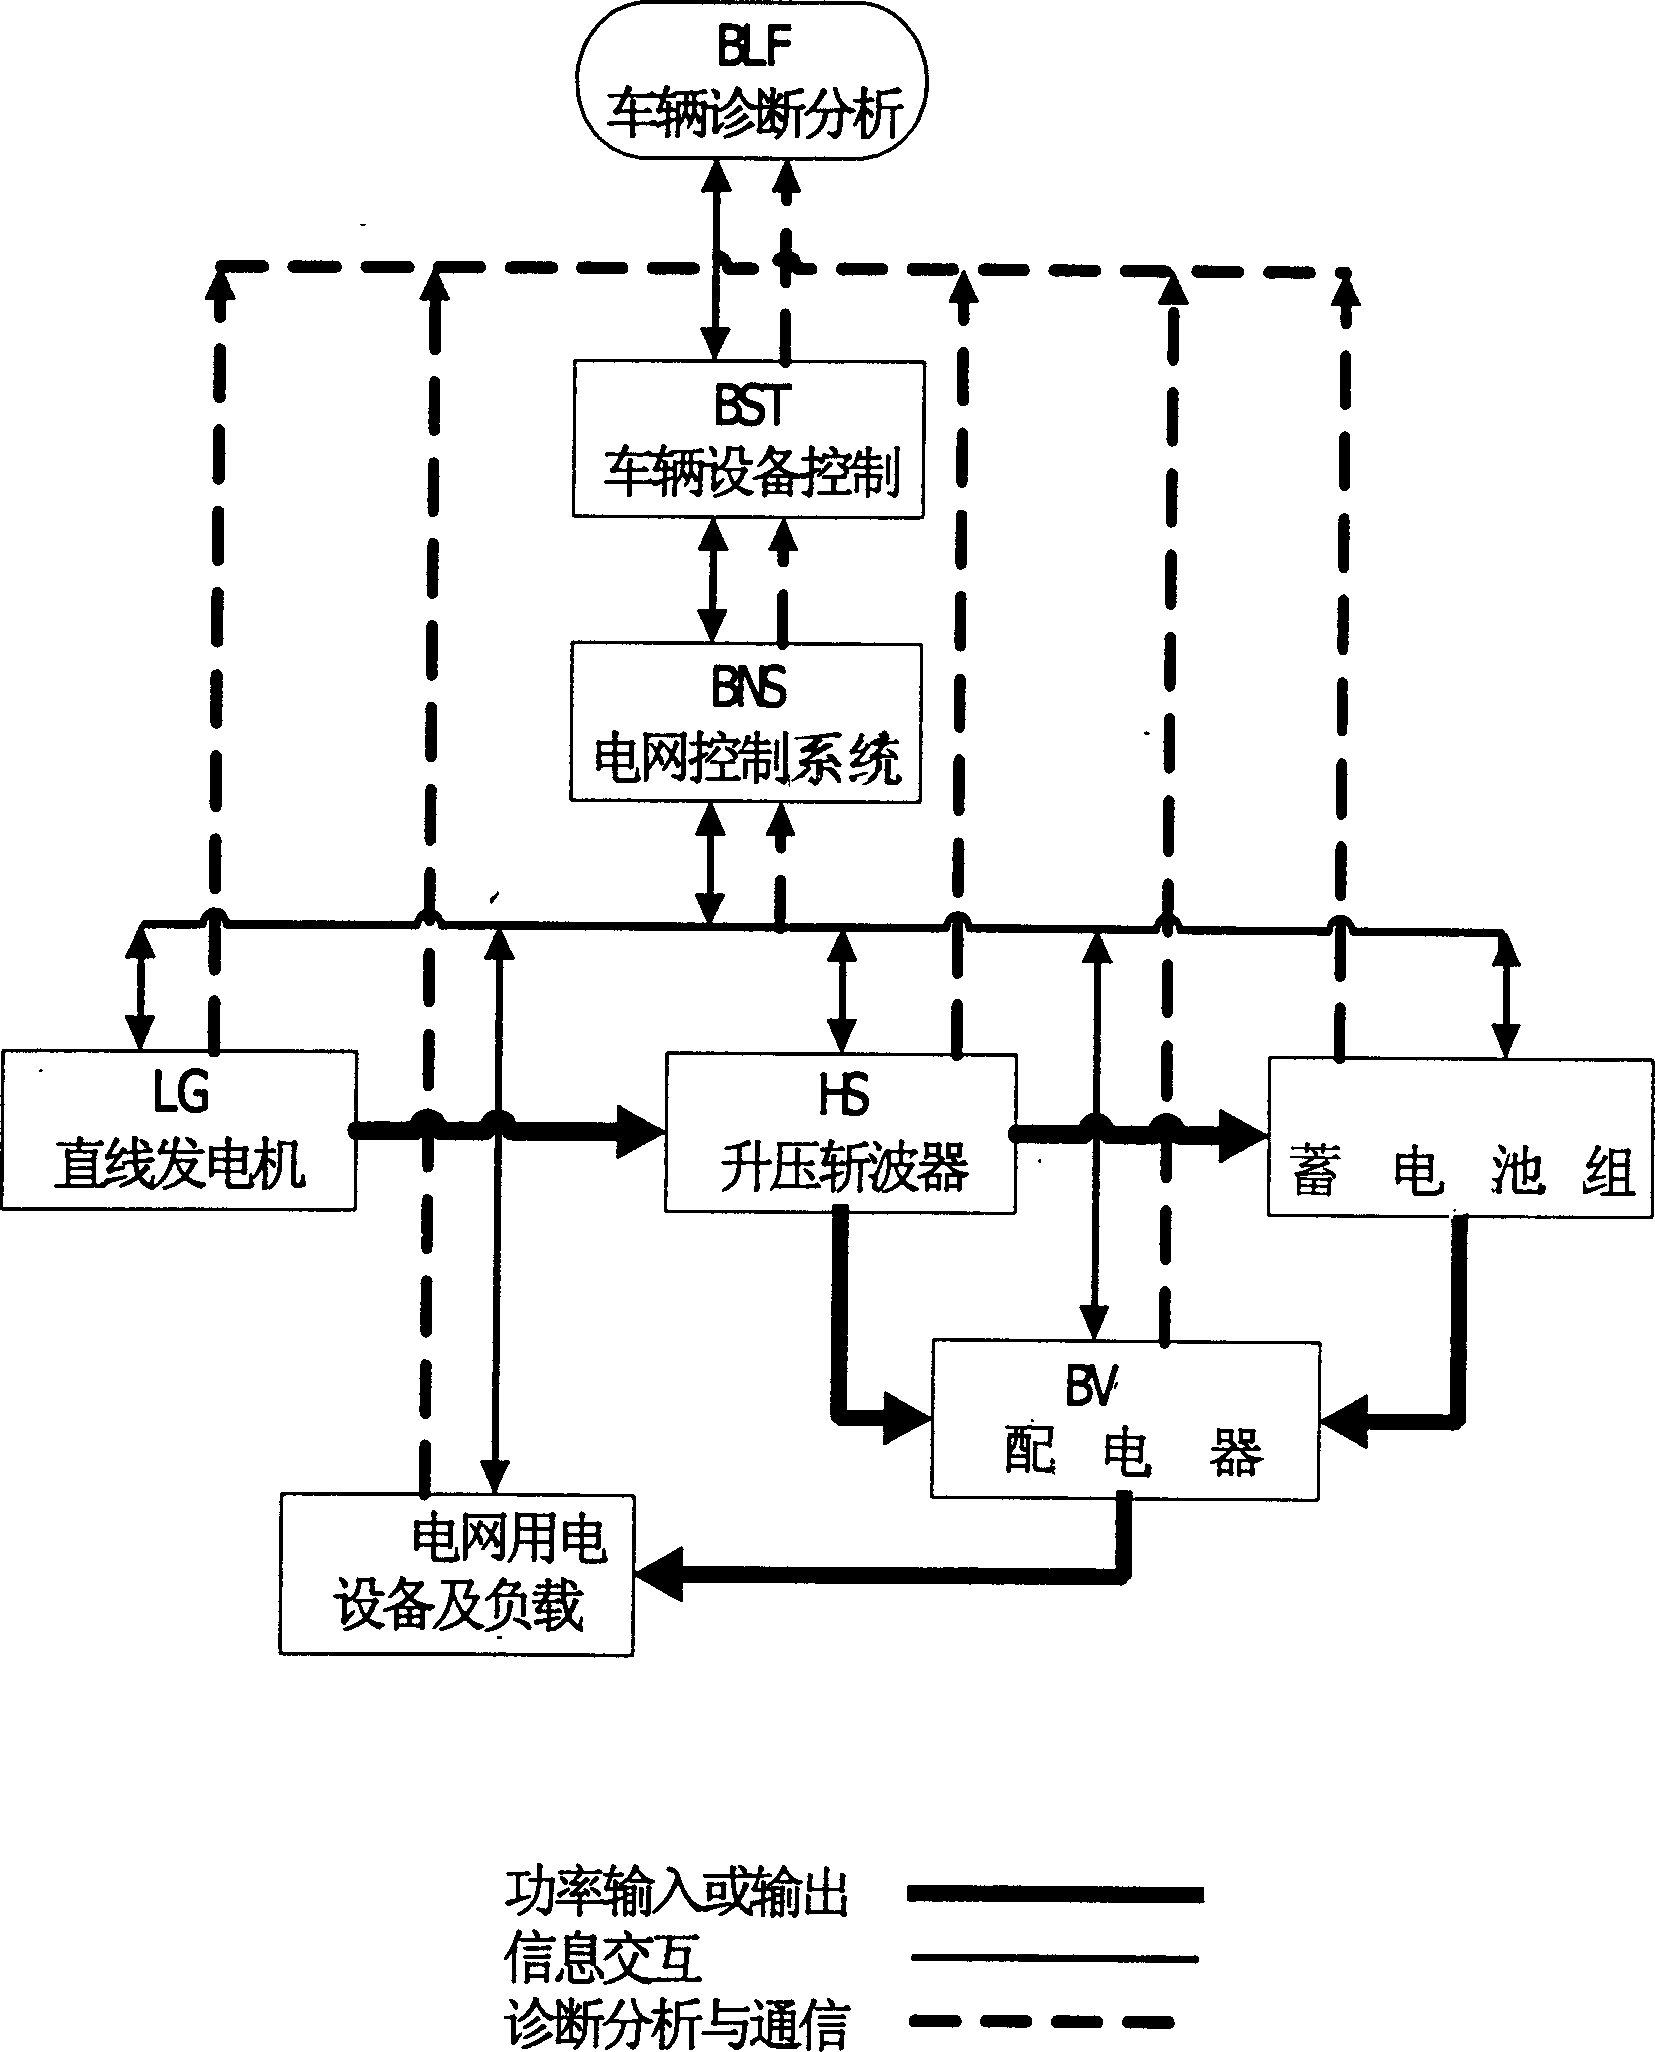 Power supply method and connection configuration for train power network on magnetic suspension train without power tracks